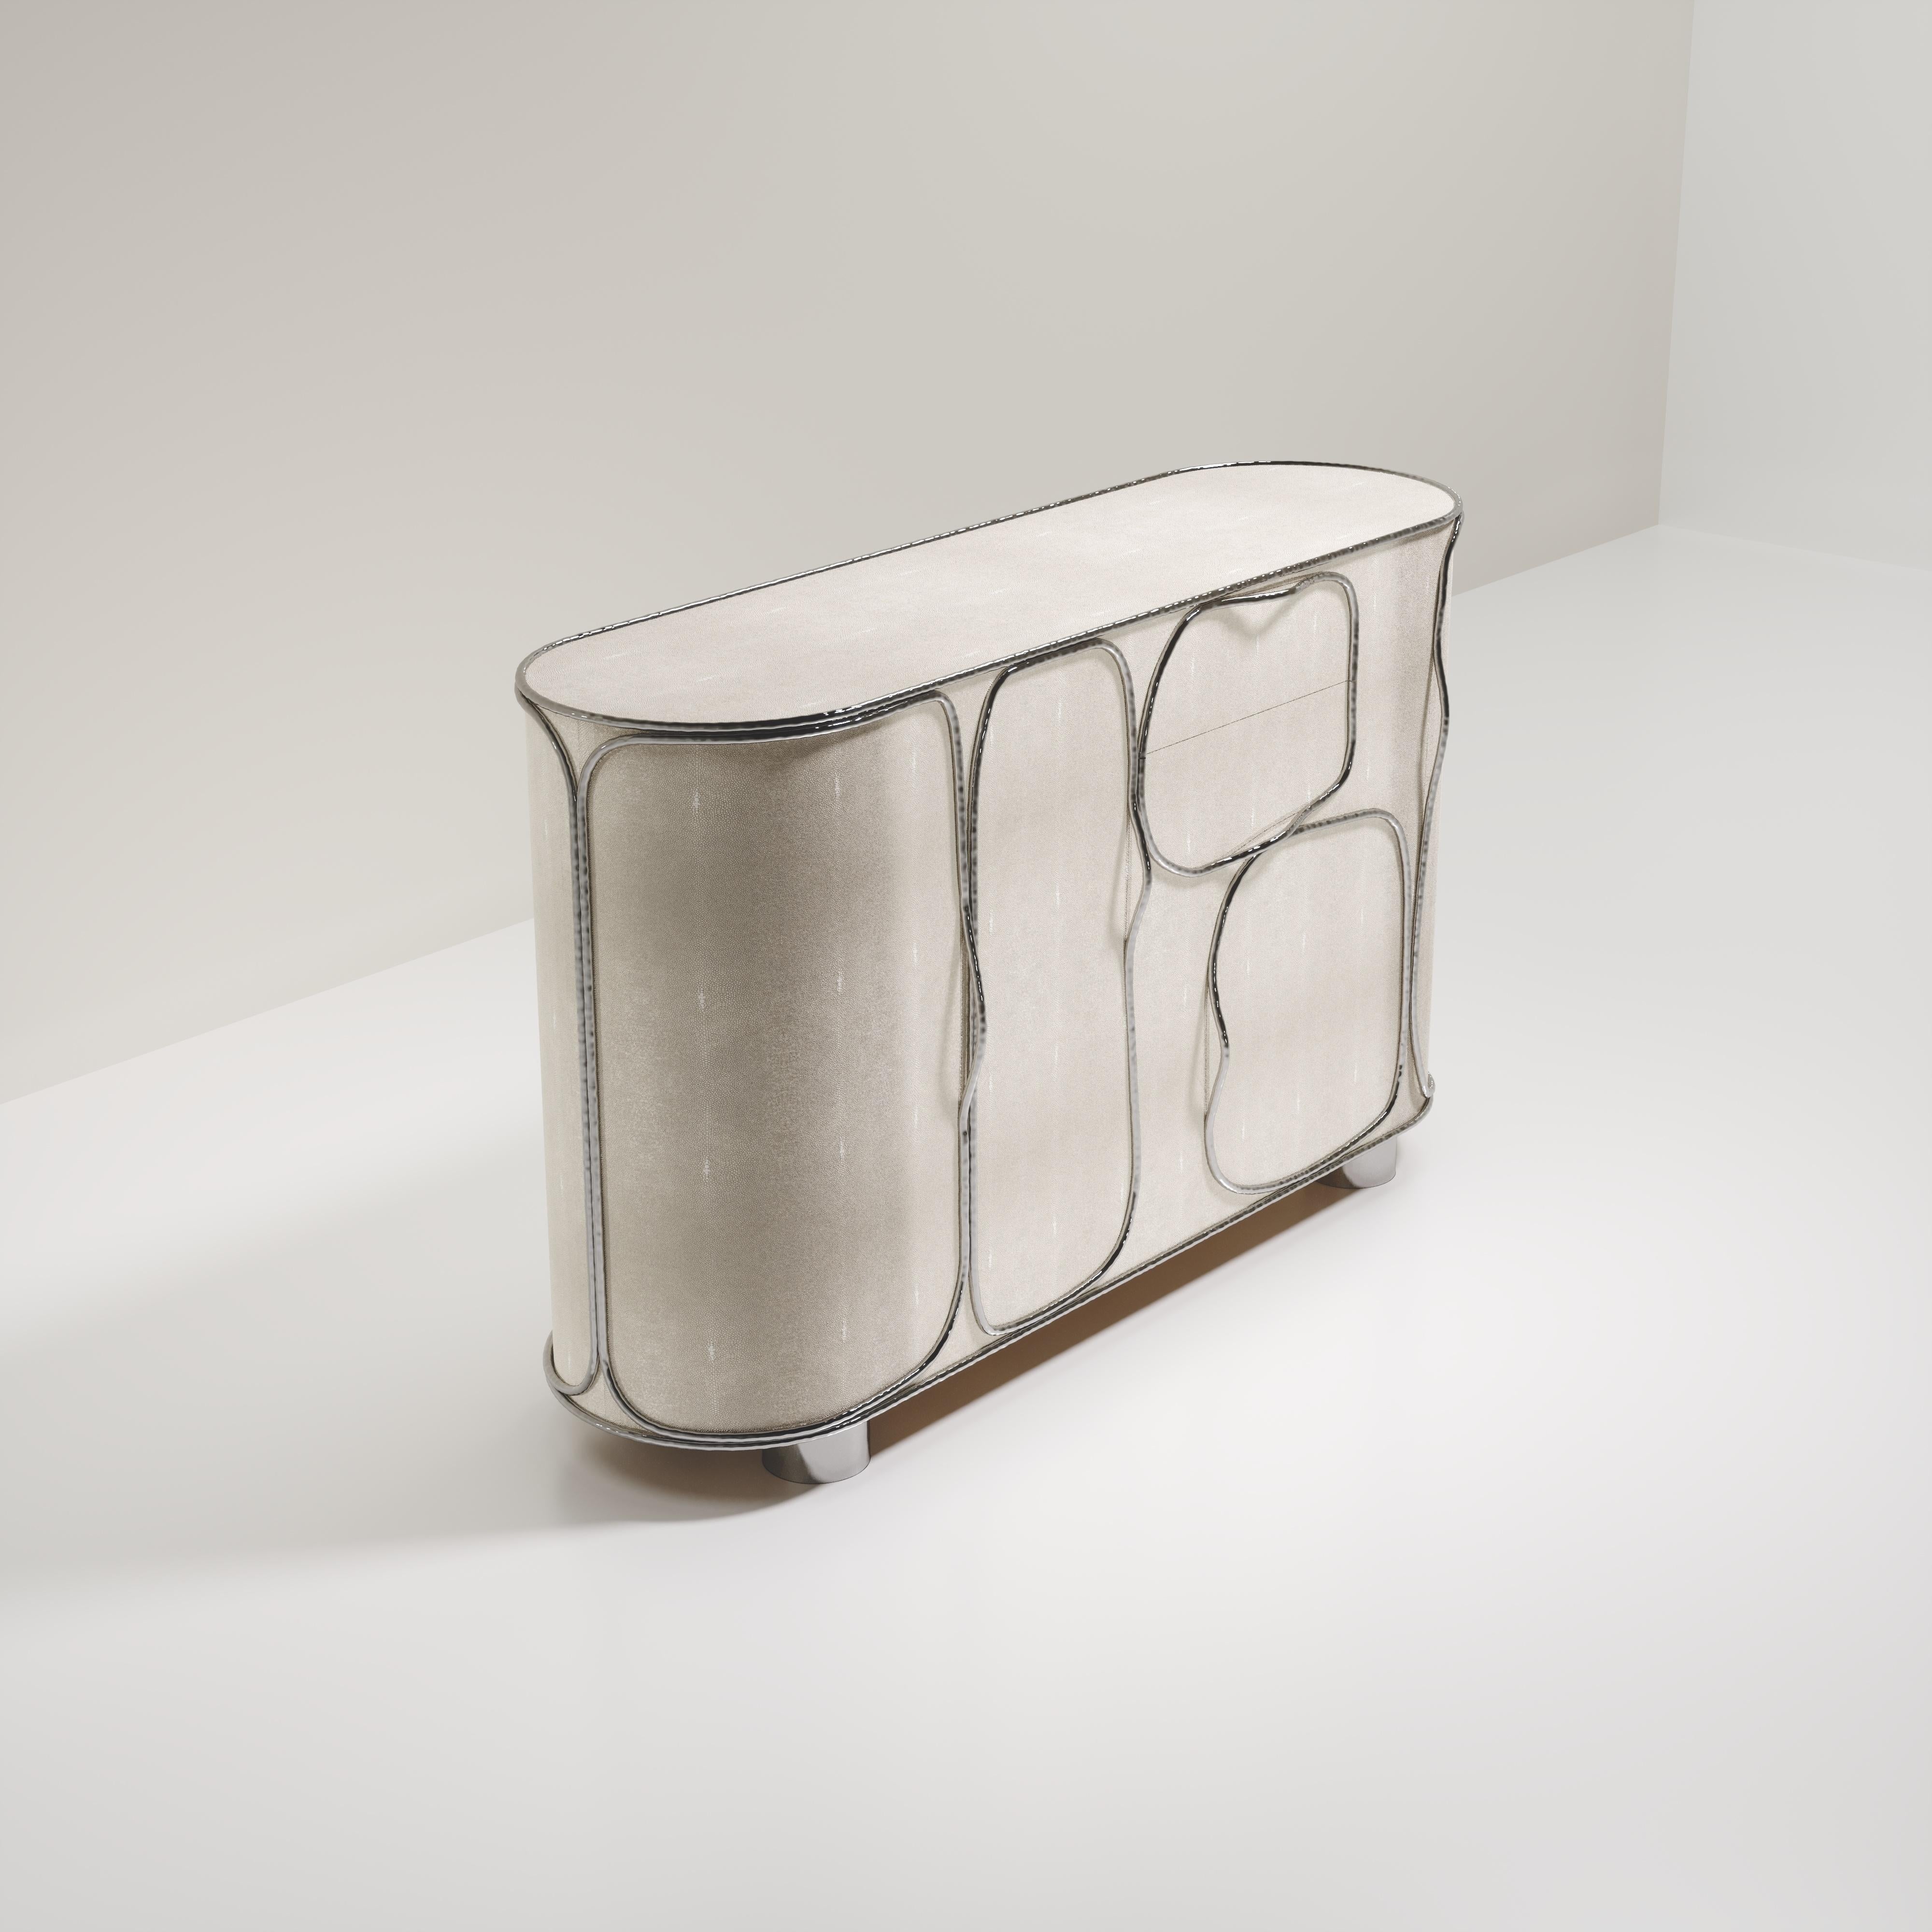 The Arianne buffet by R&Y Augousti is one of a kind statement piece. The overall piece is inlaid in cream shagreen accentuated with intricate chrome finish polished stainless steel details that have the signature Augousti 